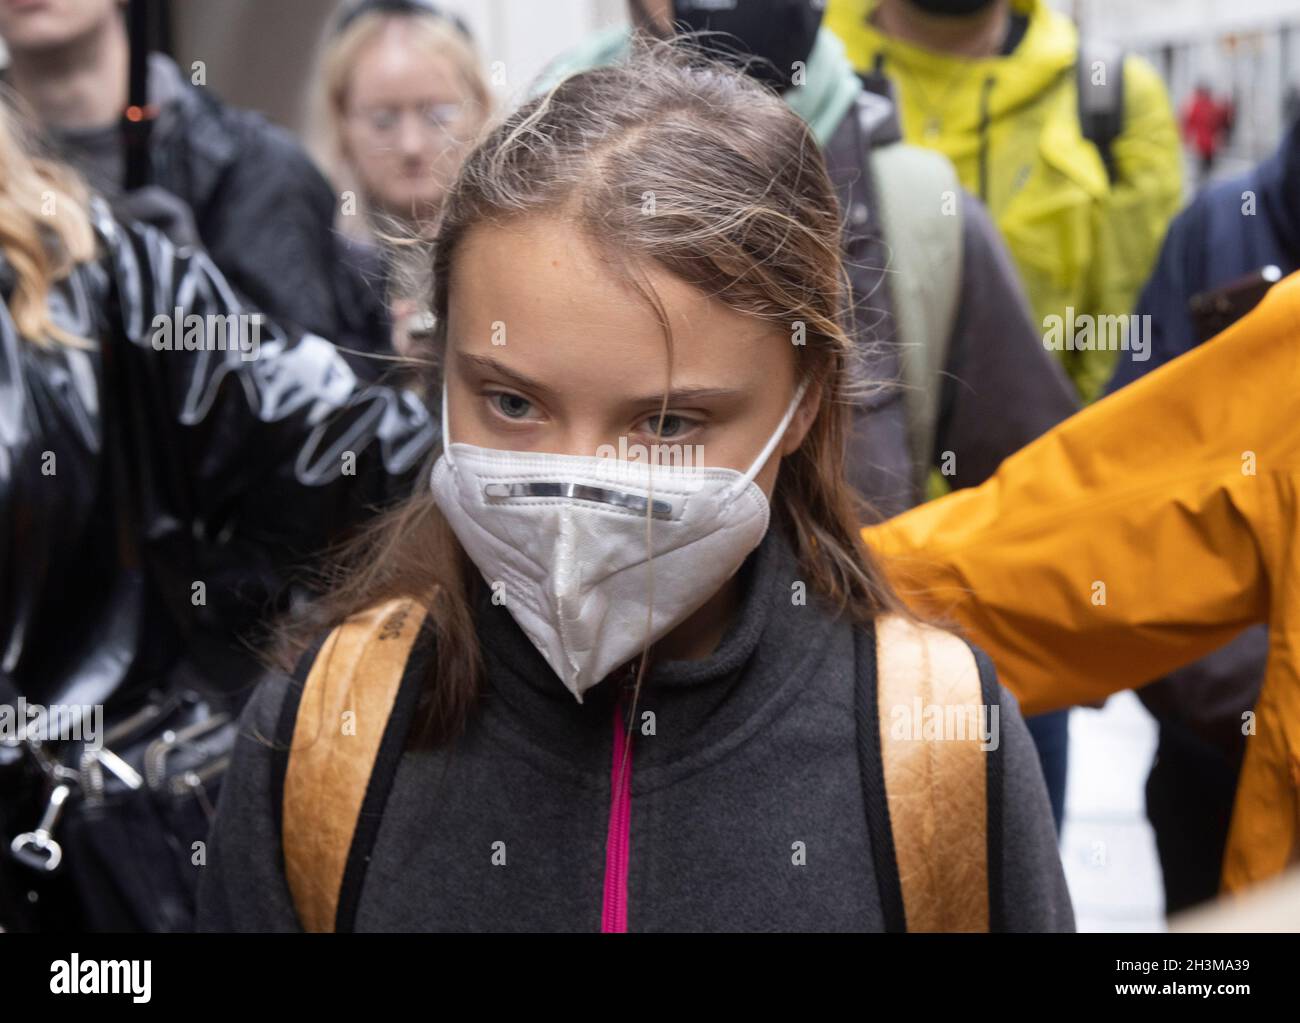 London, UK. 29th Oct, 2021. Climate activists protest outside Standard Chartered Bank in The City. Greta Thunberg arrives to join the protest. Credit: Mark Thomas/Alamy Live News Stock Photo